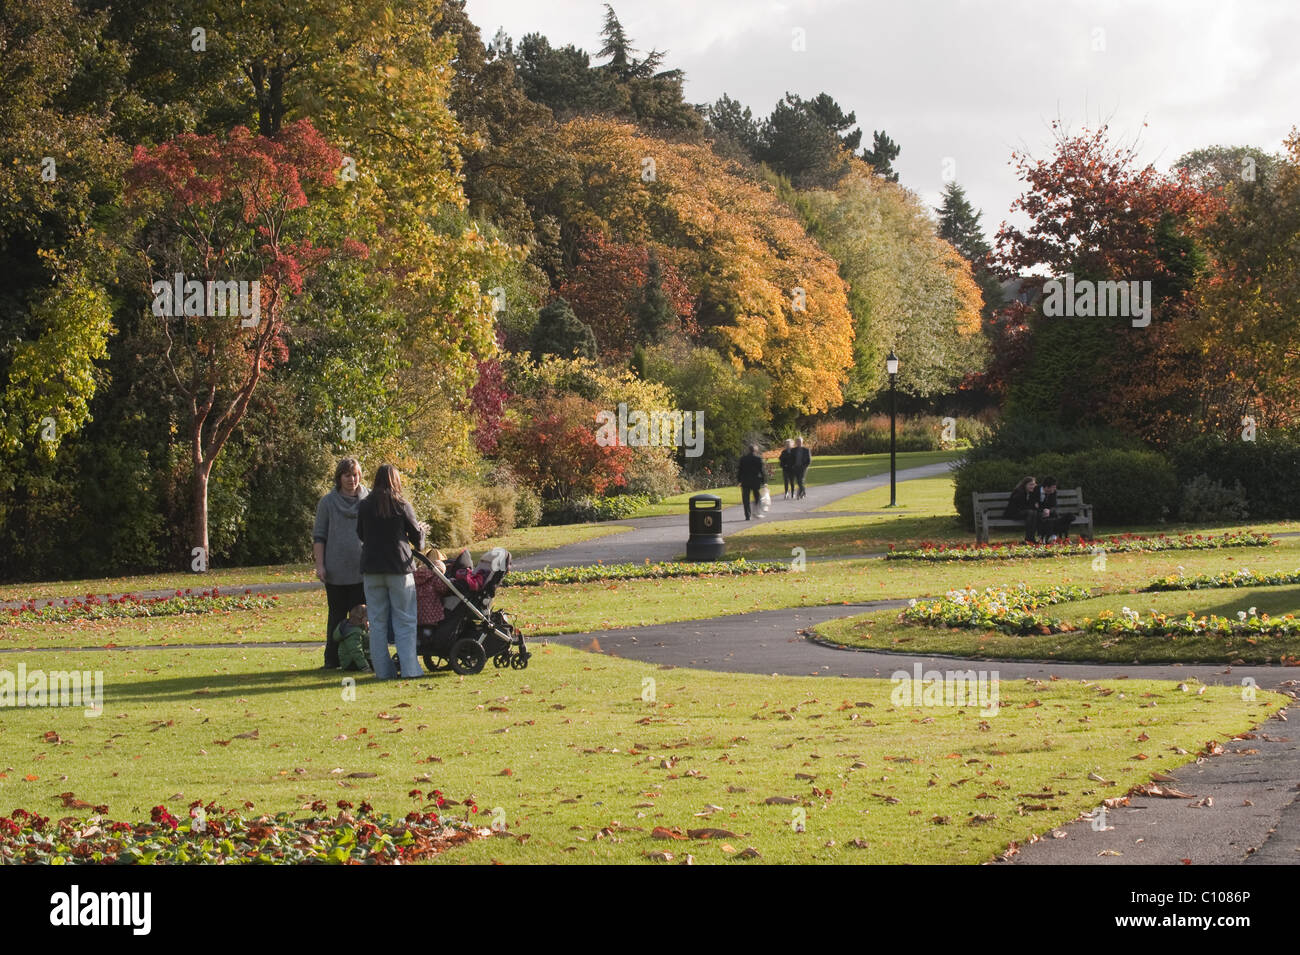 Beautiful urban landscaped park in autumn with bright colourful leaves on trees, & people relaxing - Valley Gardens, Harrogate, Yorkshire, England. Stock Photo